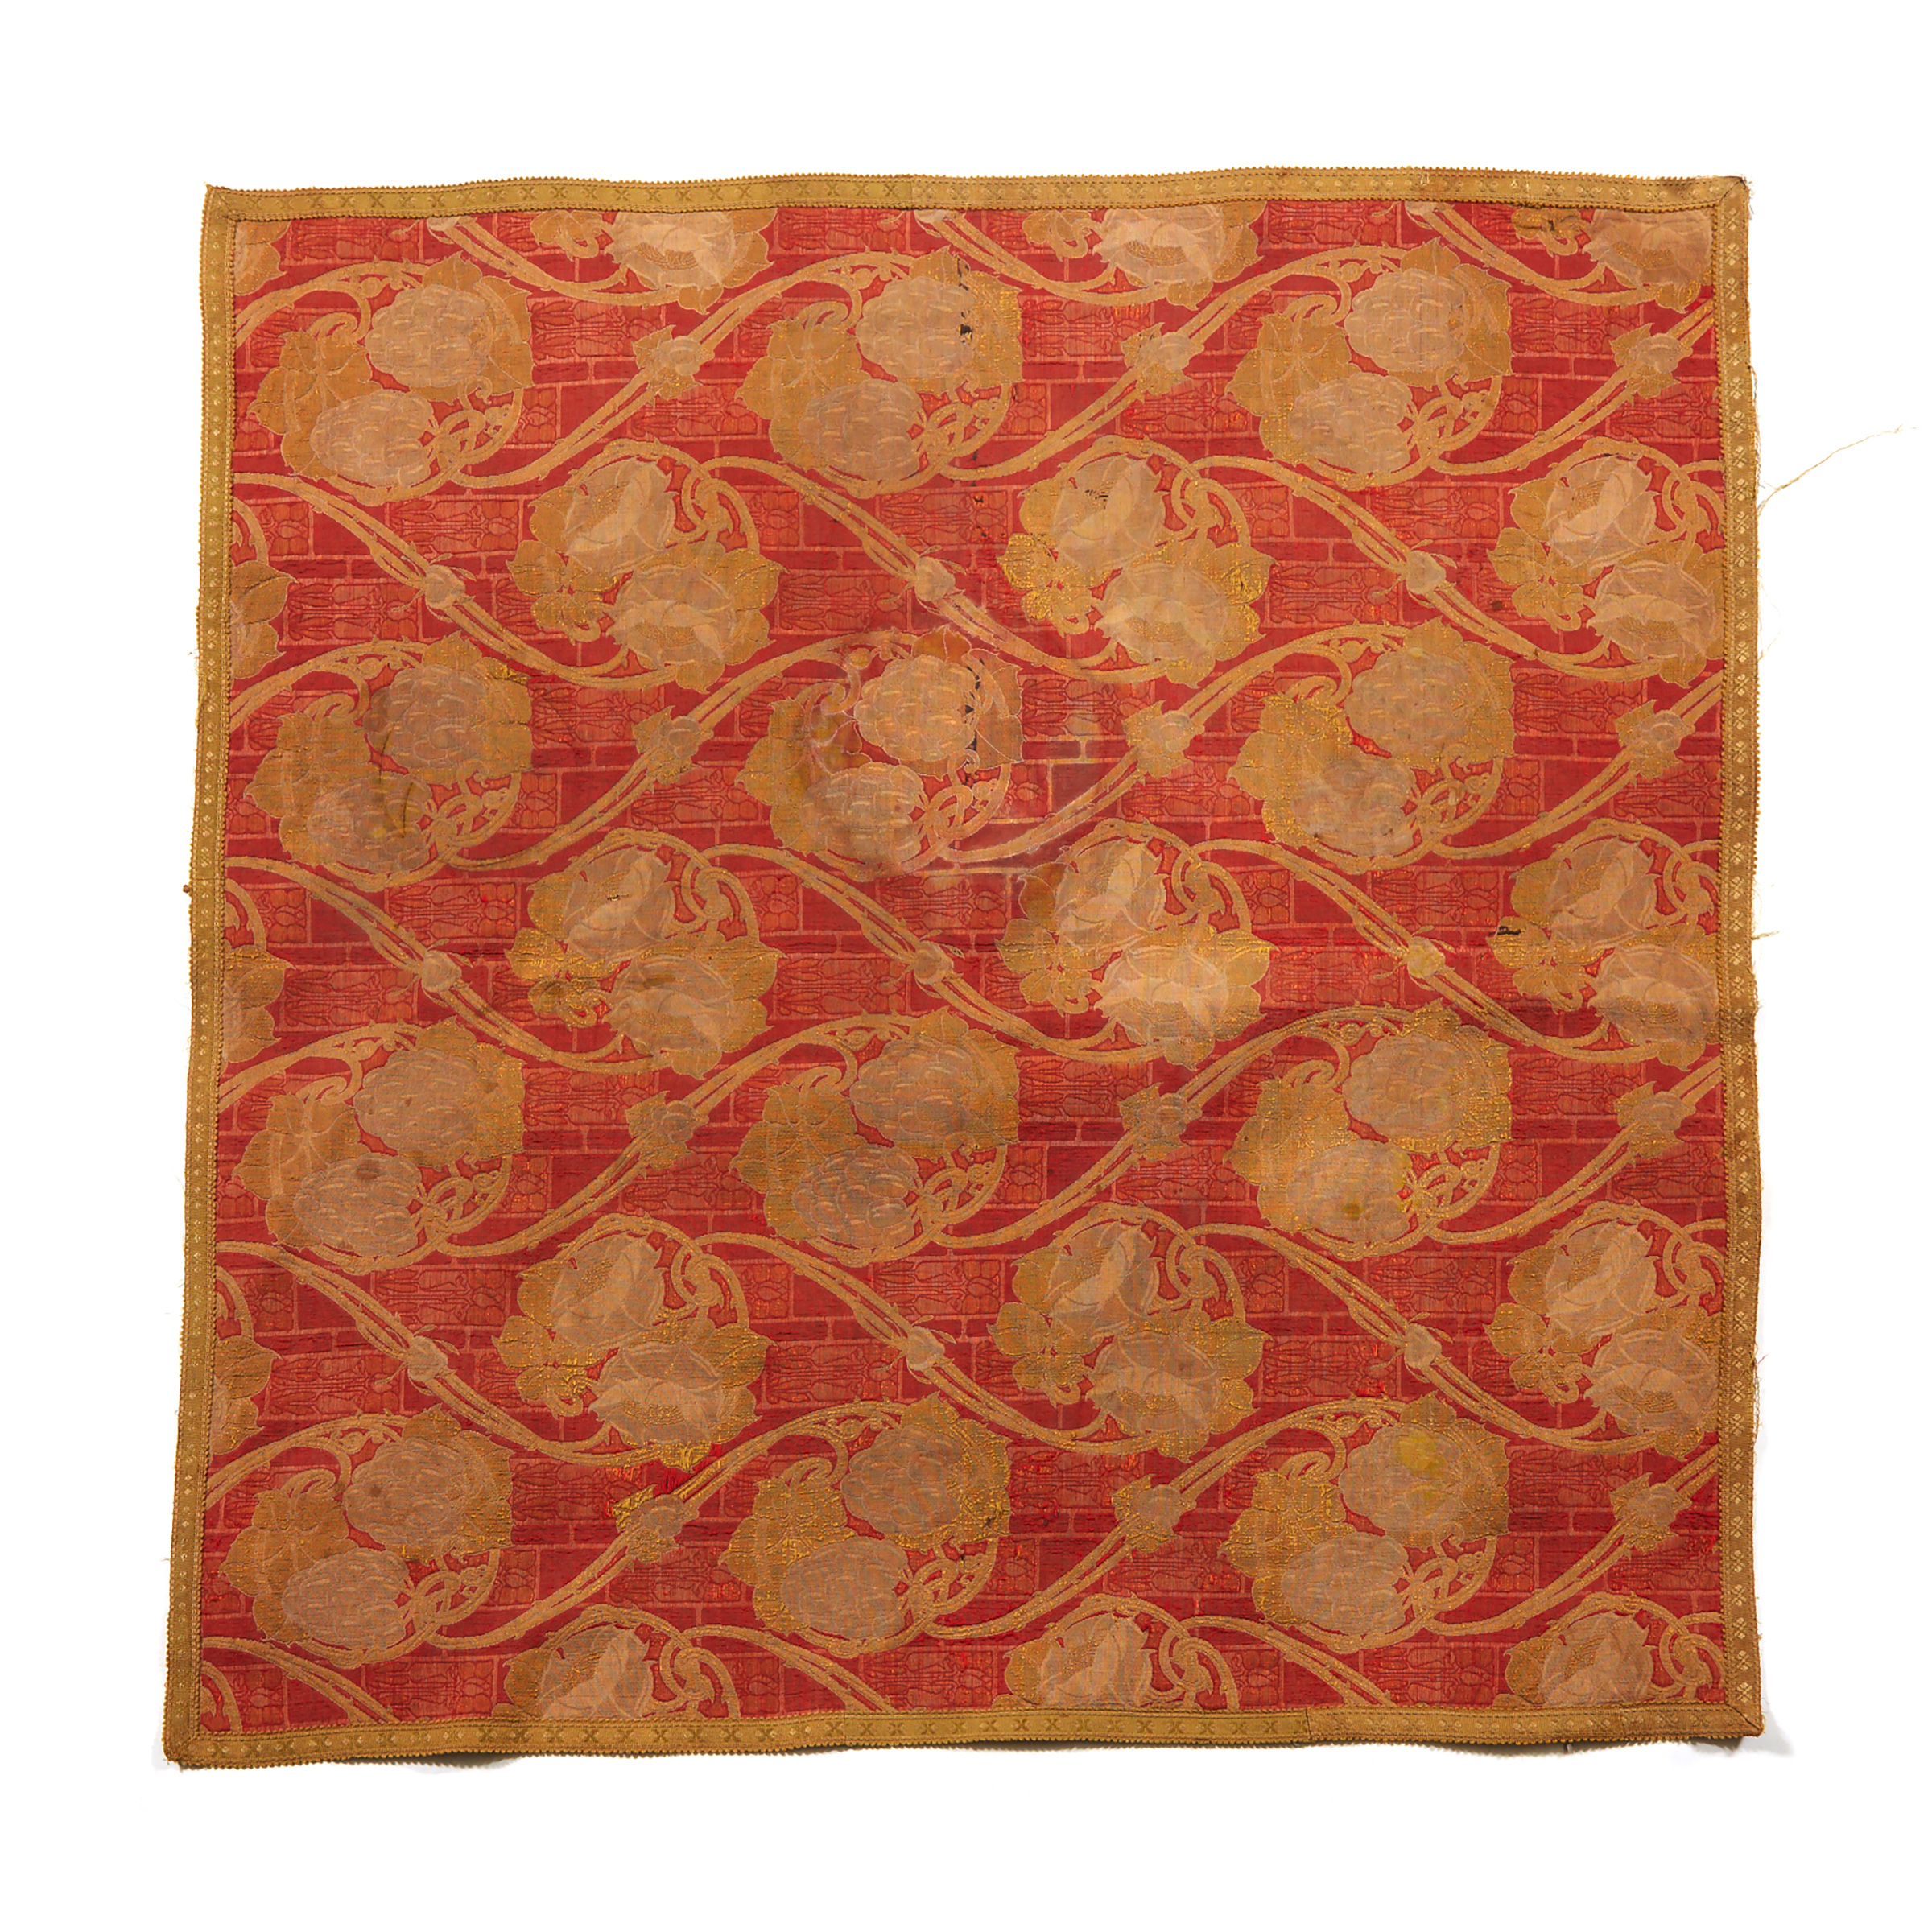 Art Nouveaux Textiles, one on silk with metallic thread highlights